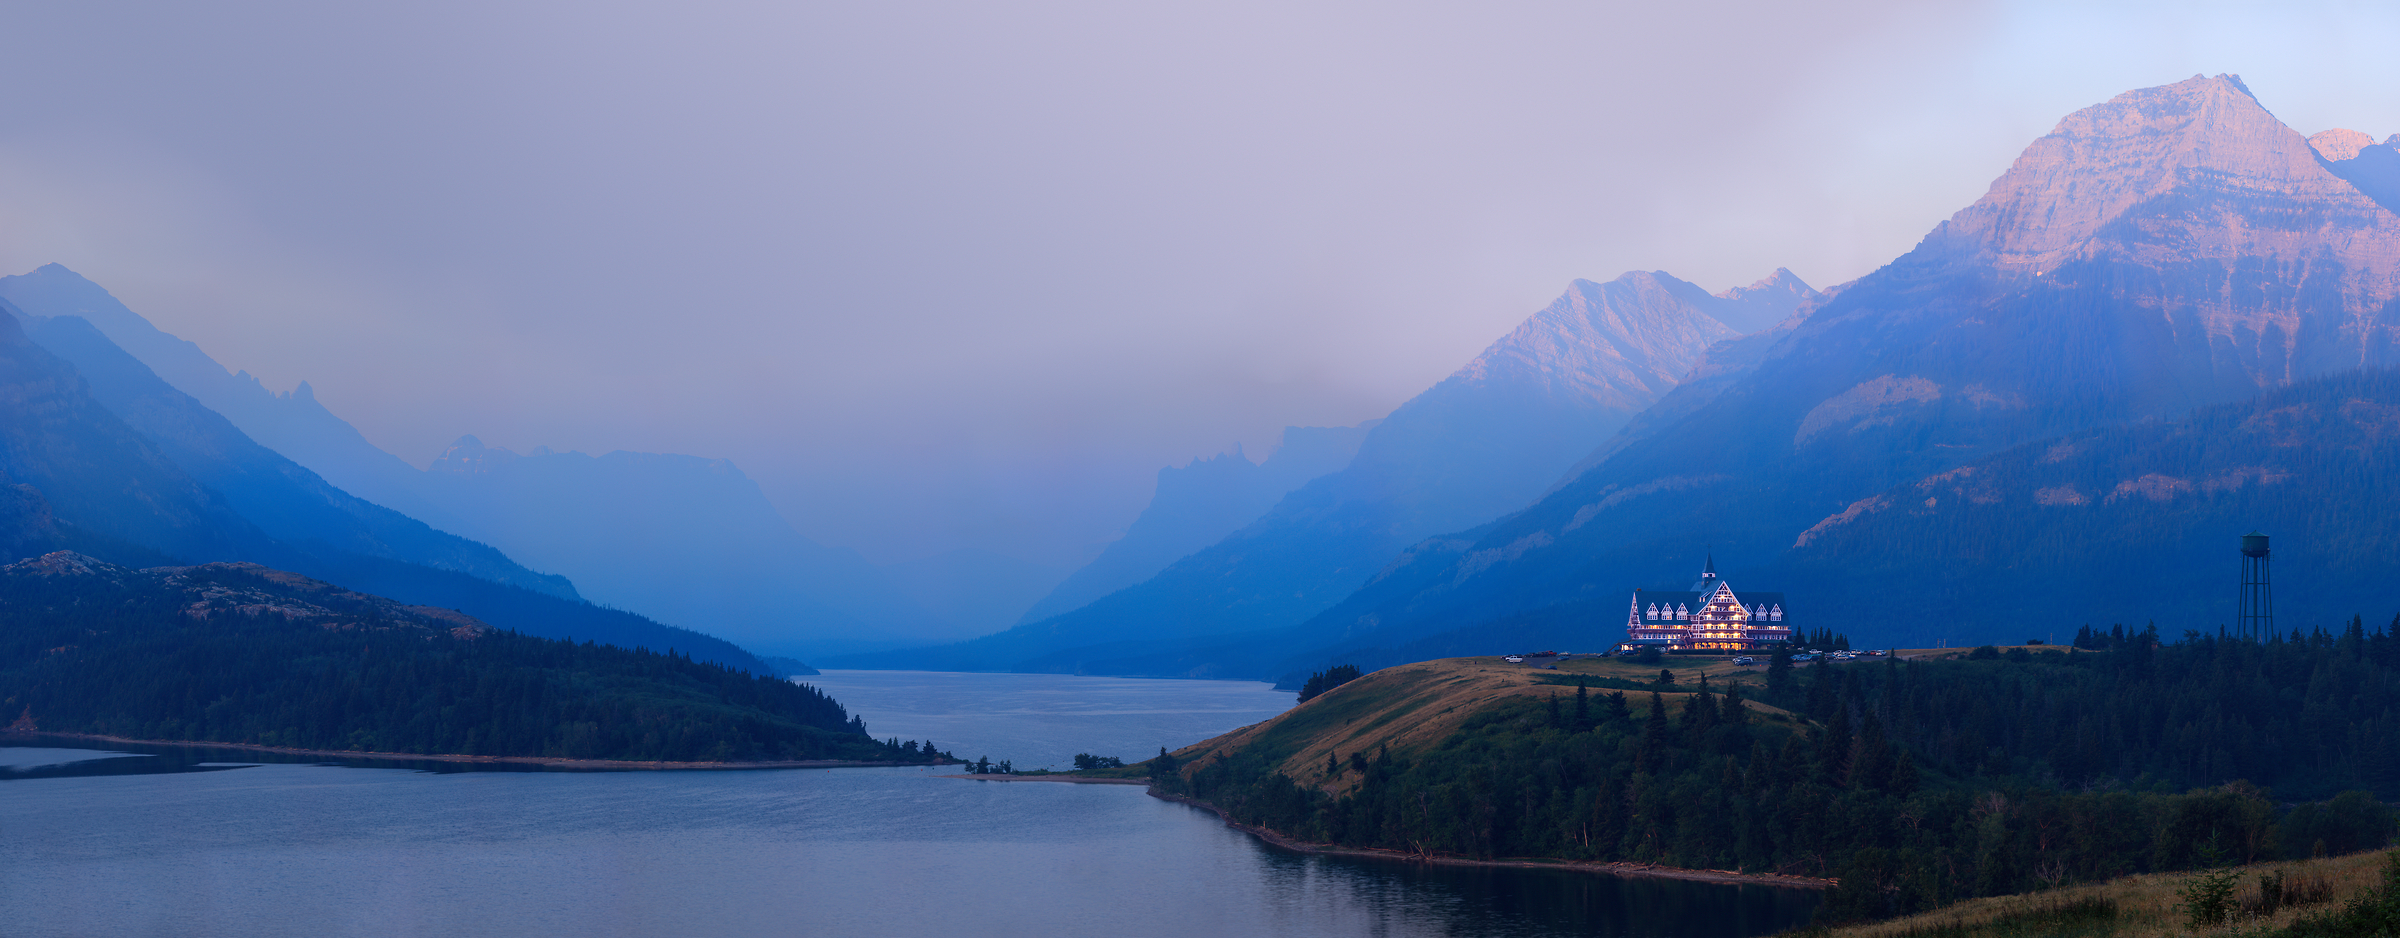 4,650 megapixels! A very high resolution, large-format VAST photo print of the Prince of Wales Hotel in Waterton Lakes National Park with smoke from a wildfire in the valley in the background; fine art landscape photograph created by Scott Dimond in Alberta, Canada.